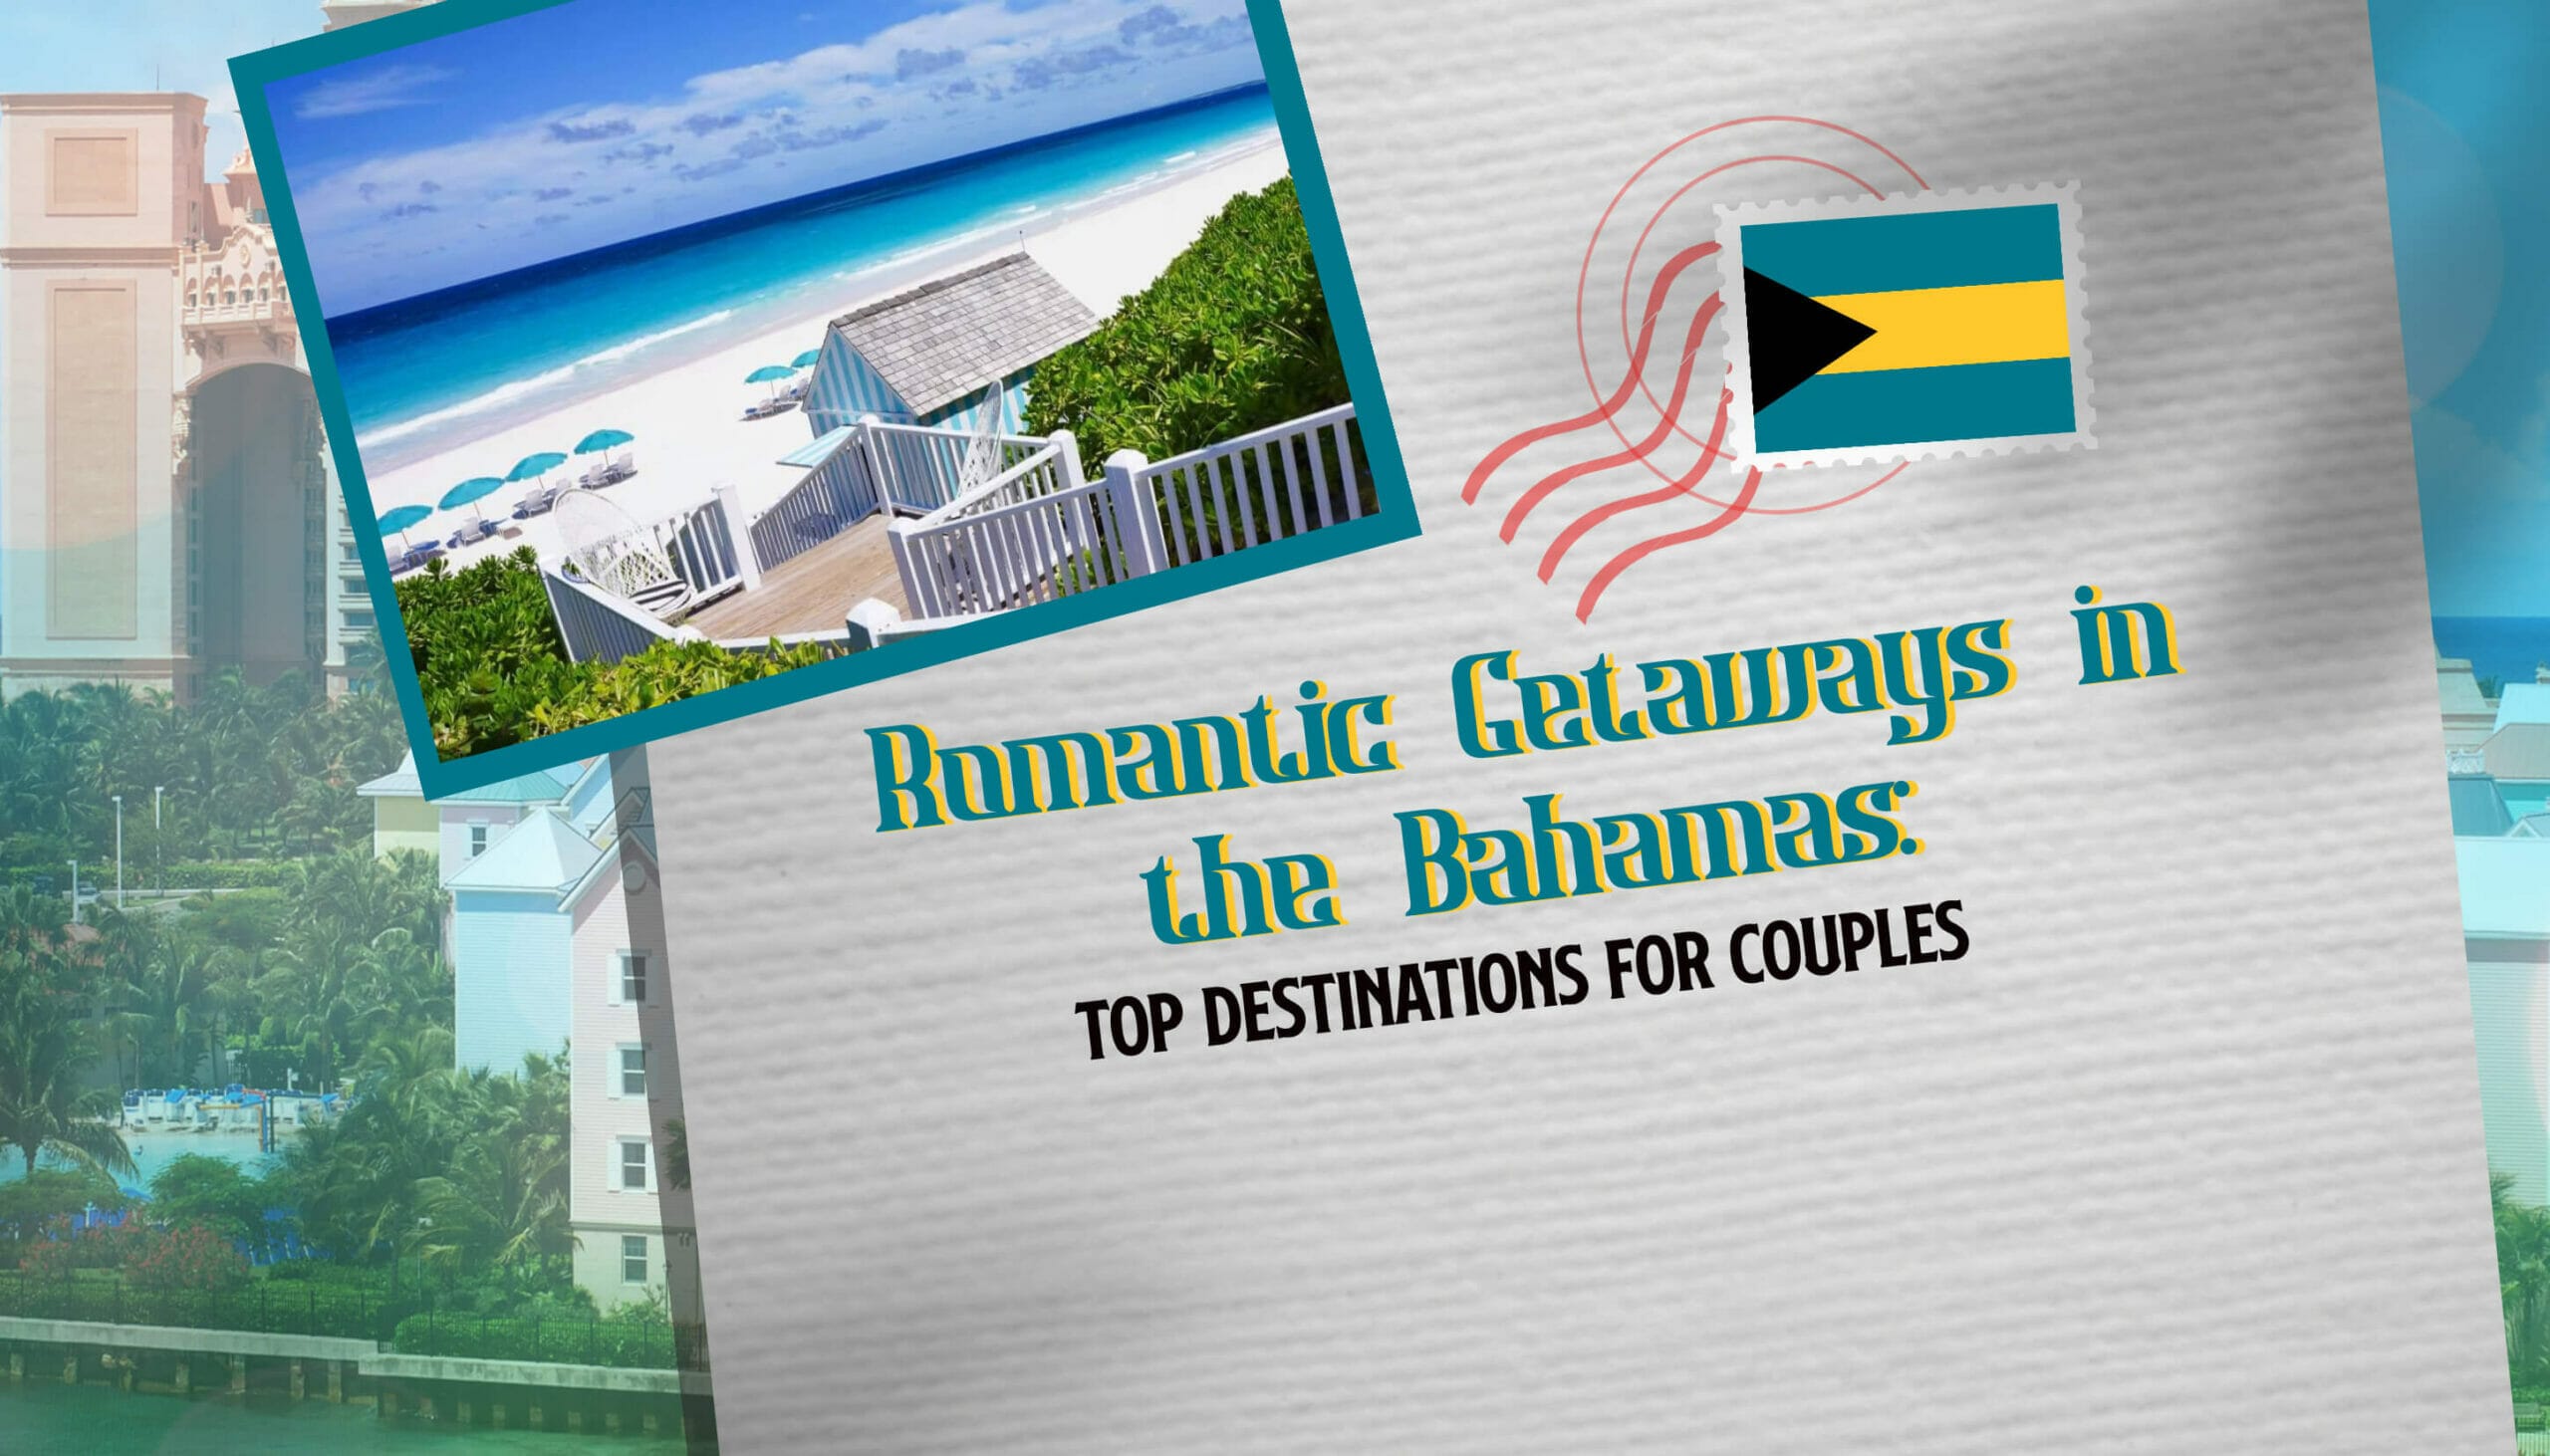 Romantic Getaways in the Bahamas Top Destinations for Couples